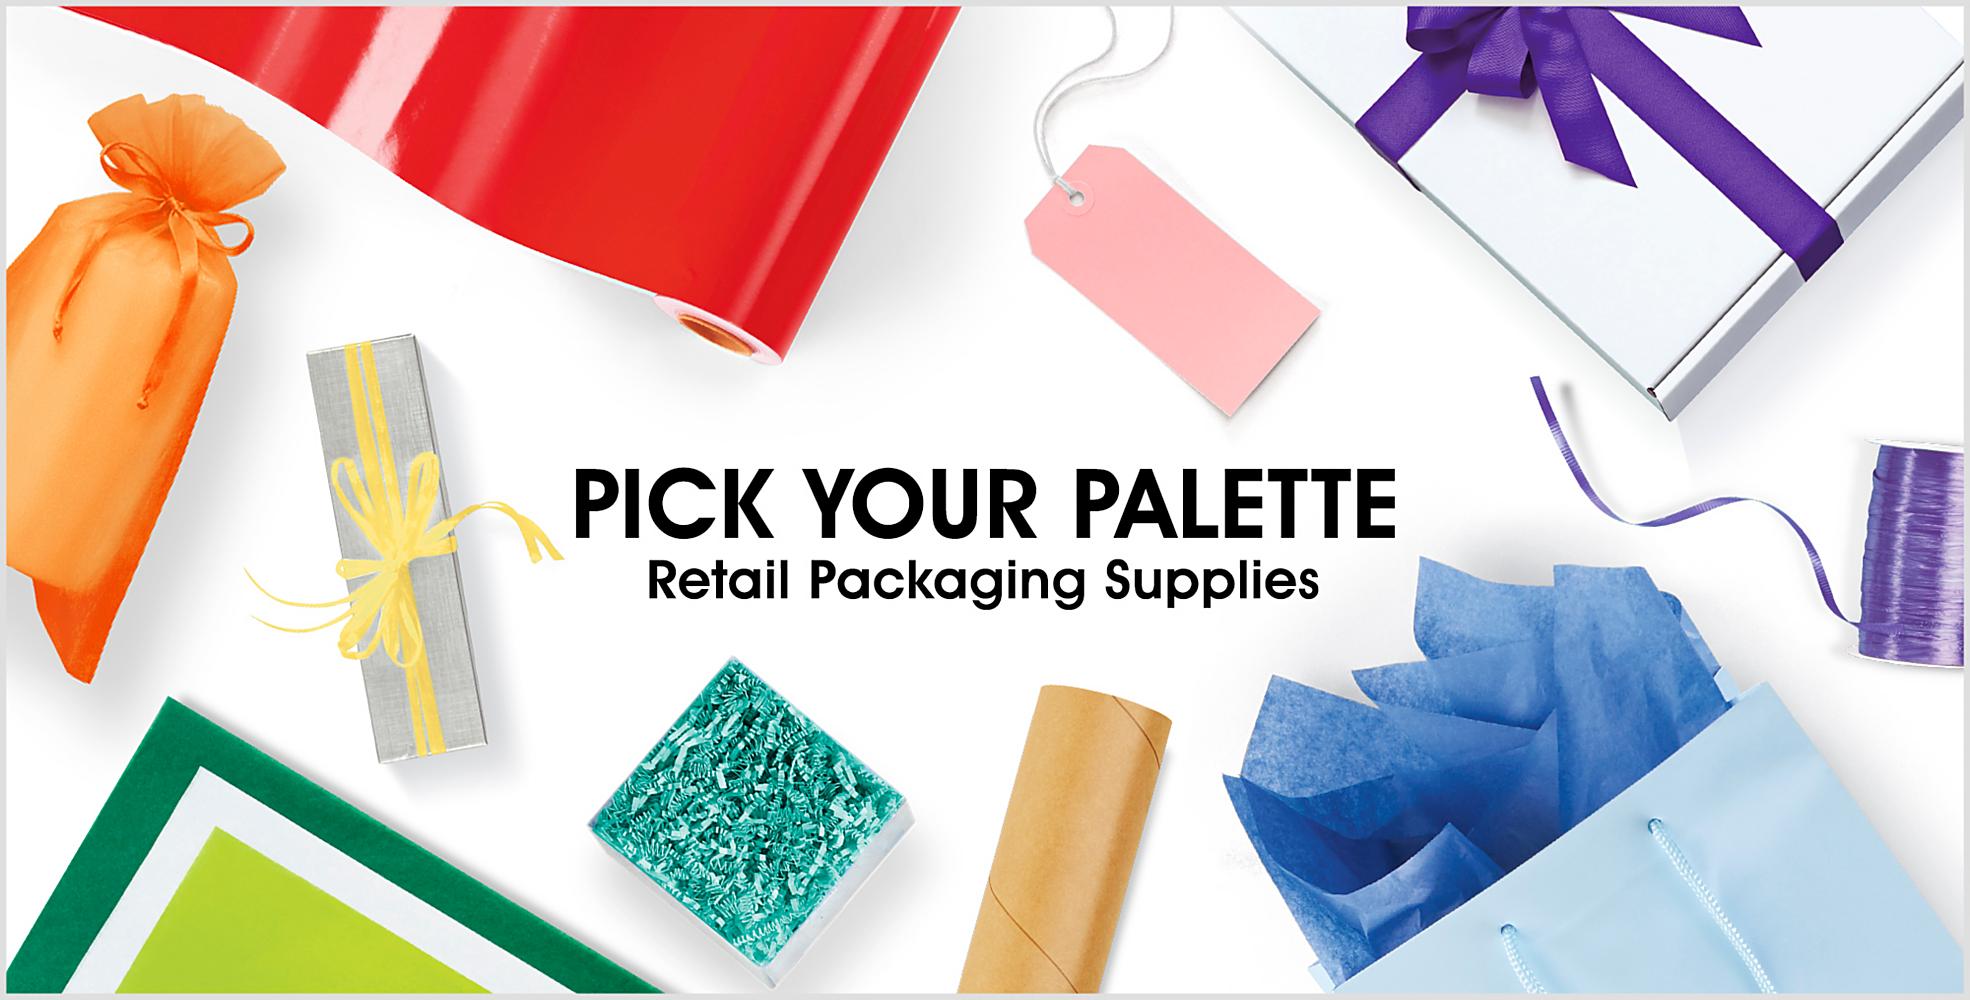 Pick Your Palette - Retail Packaging Supplies